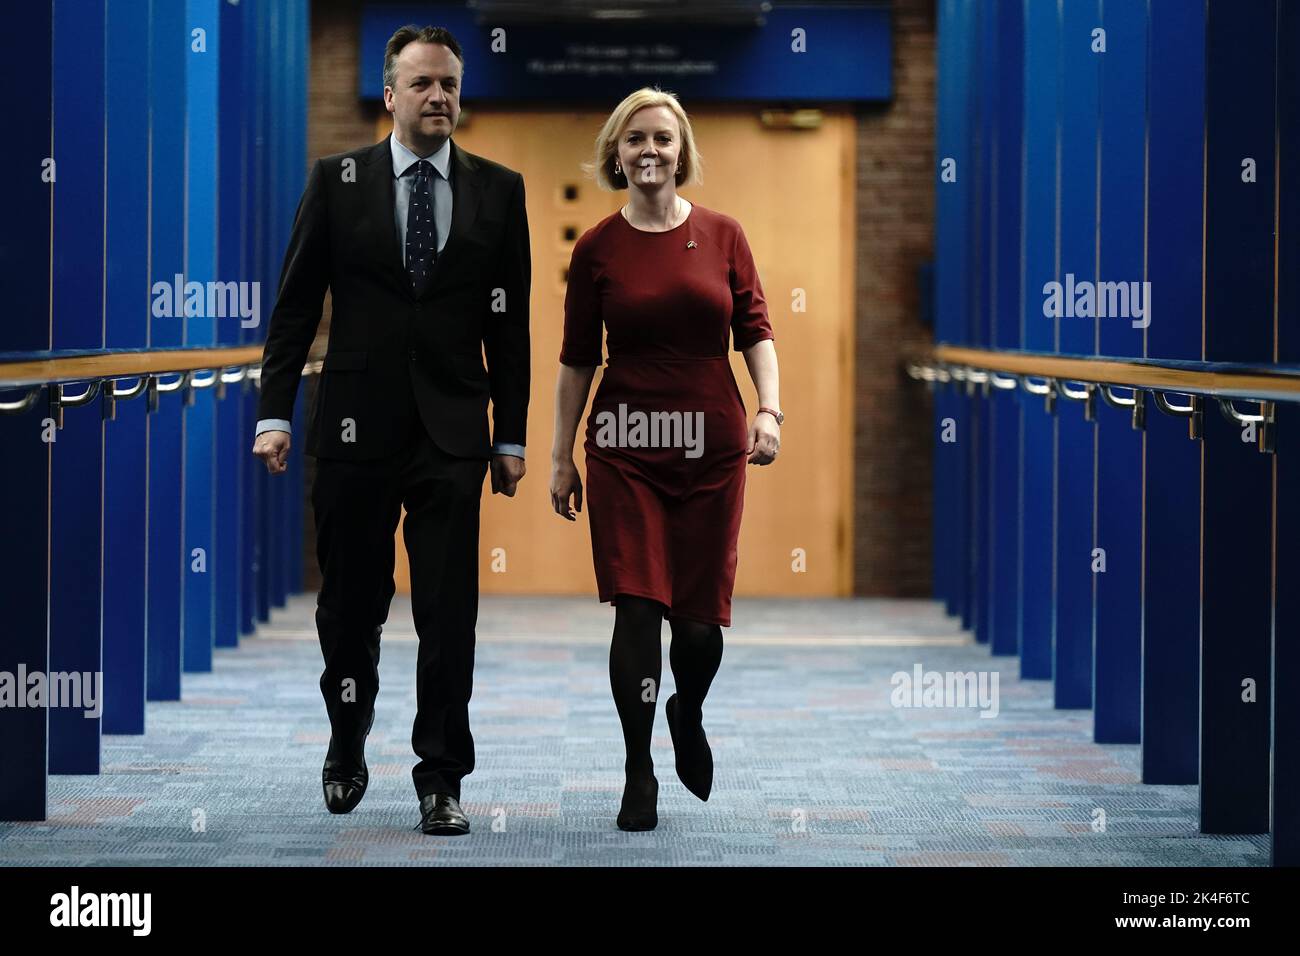 Prime Minister Liz Truss and her husband husband Hugh O'Leary, walk across the Hyatt hotel bridge at the Conservative Party annual conference at the International Convention Centre in Birmingham. Picture date: Sunday October 2, 2022. Stock Photo